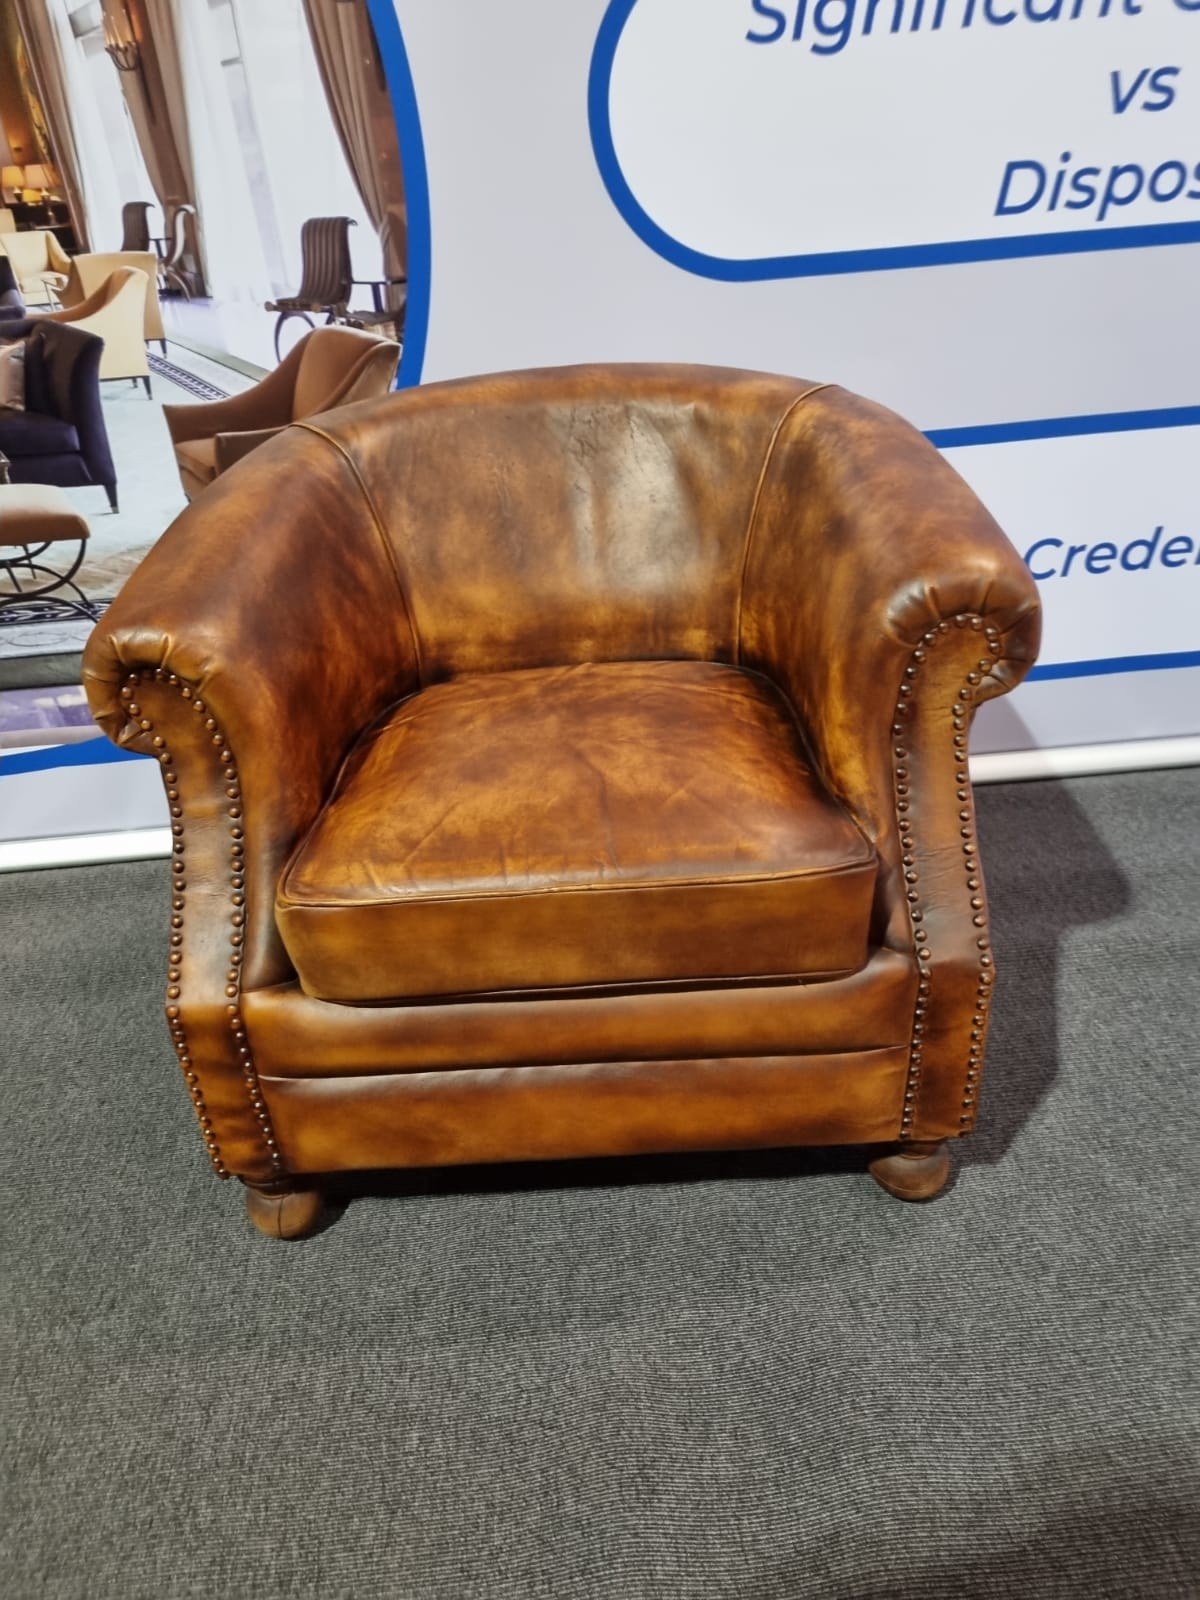 Club Chair Leather Antique Whisky A Good Looking And Iconic Piece Of English Furniture Known The - Image 5 of 6